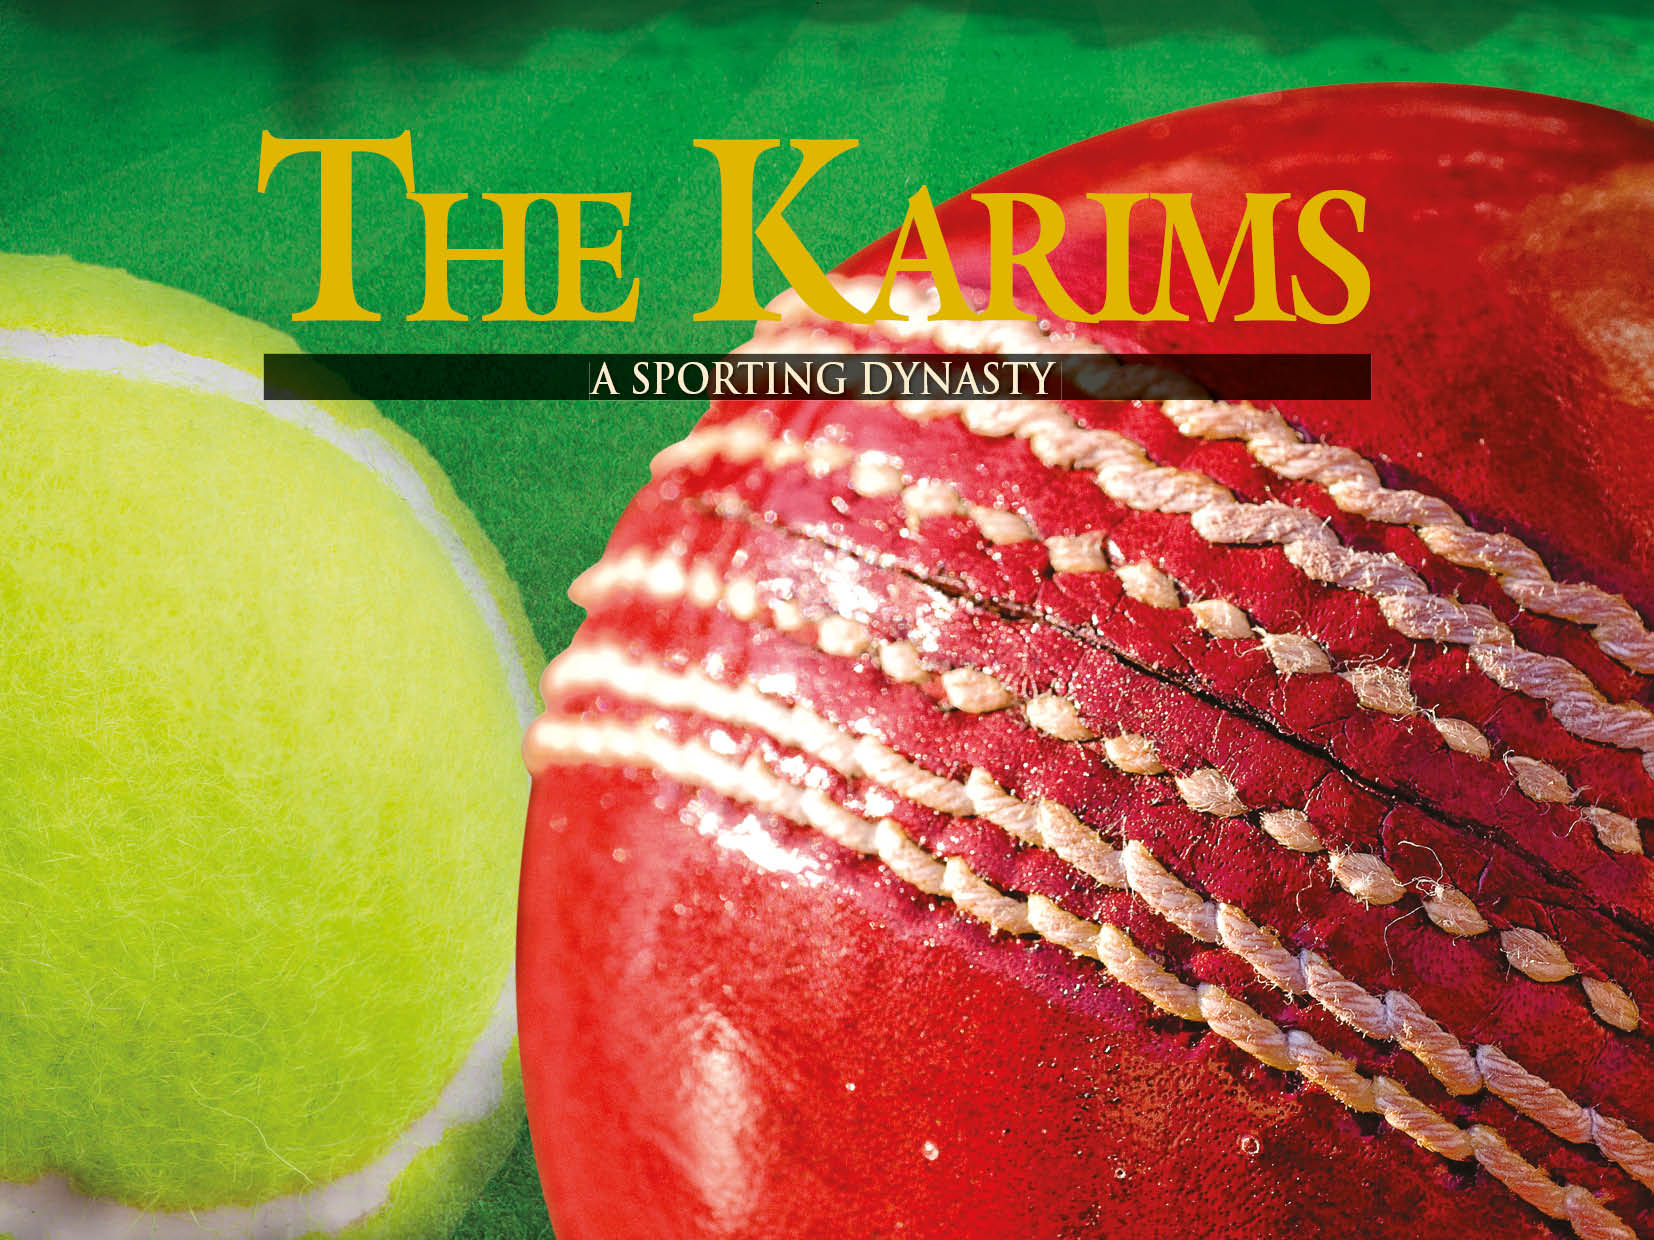 The Karims: A Sporting Dynasty